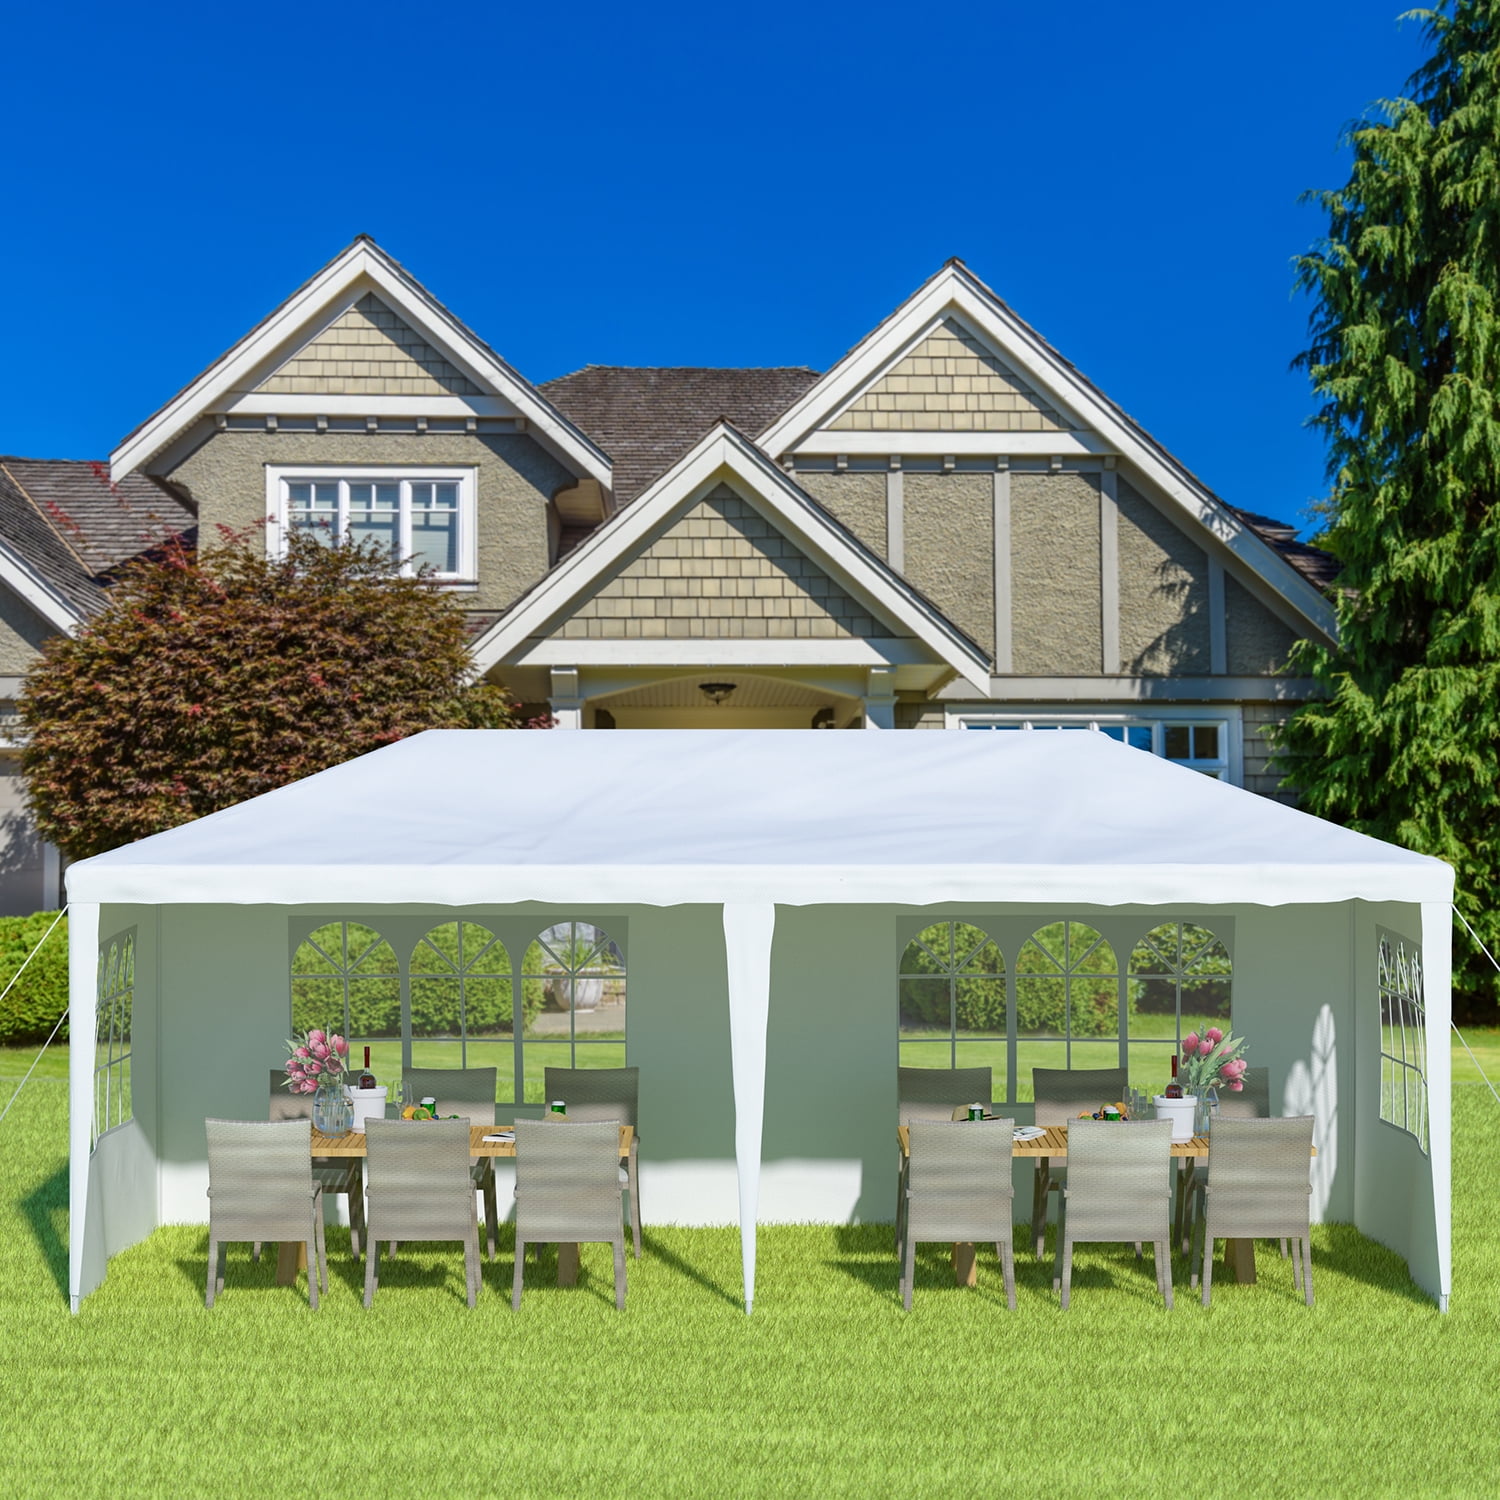 Heavy Duty Gazebos Wedding Party with 5 Removable Sidewalls 10 x 20 x 8.5ft Outdoor Patio Canopy 10 x 20 x 8.5 ft, White 4 Sides Wall Sunshades Shelter Waterproof Commercial Tent for Events 